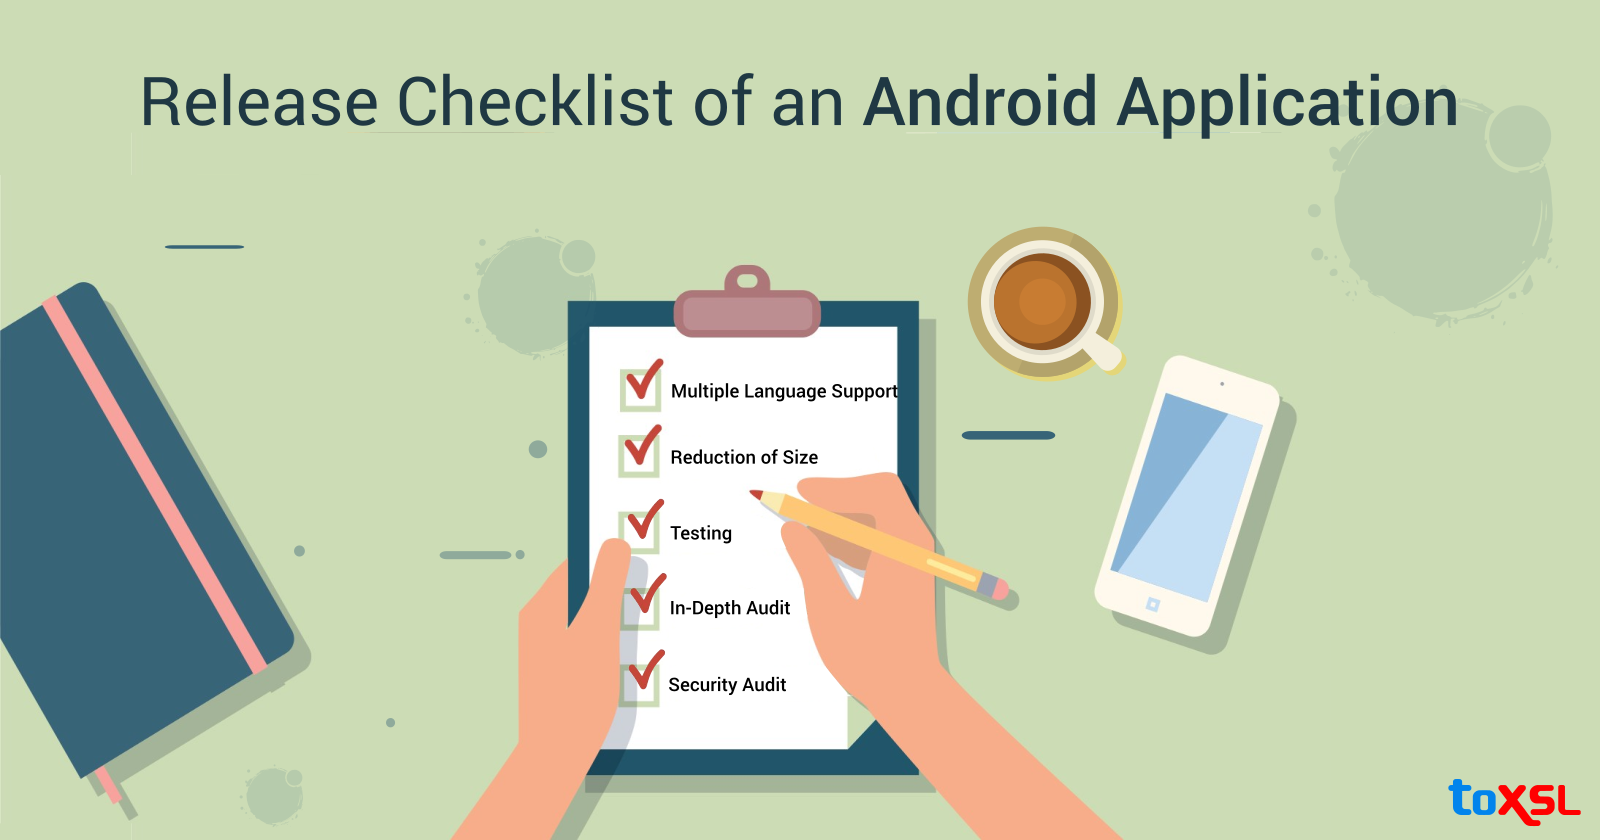 Checklist to Cover Before the Release of an Android Application